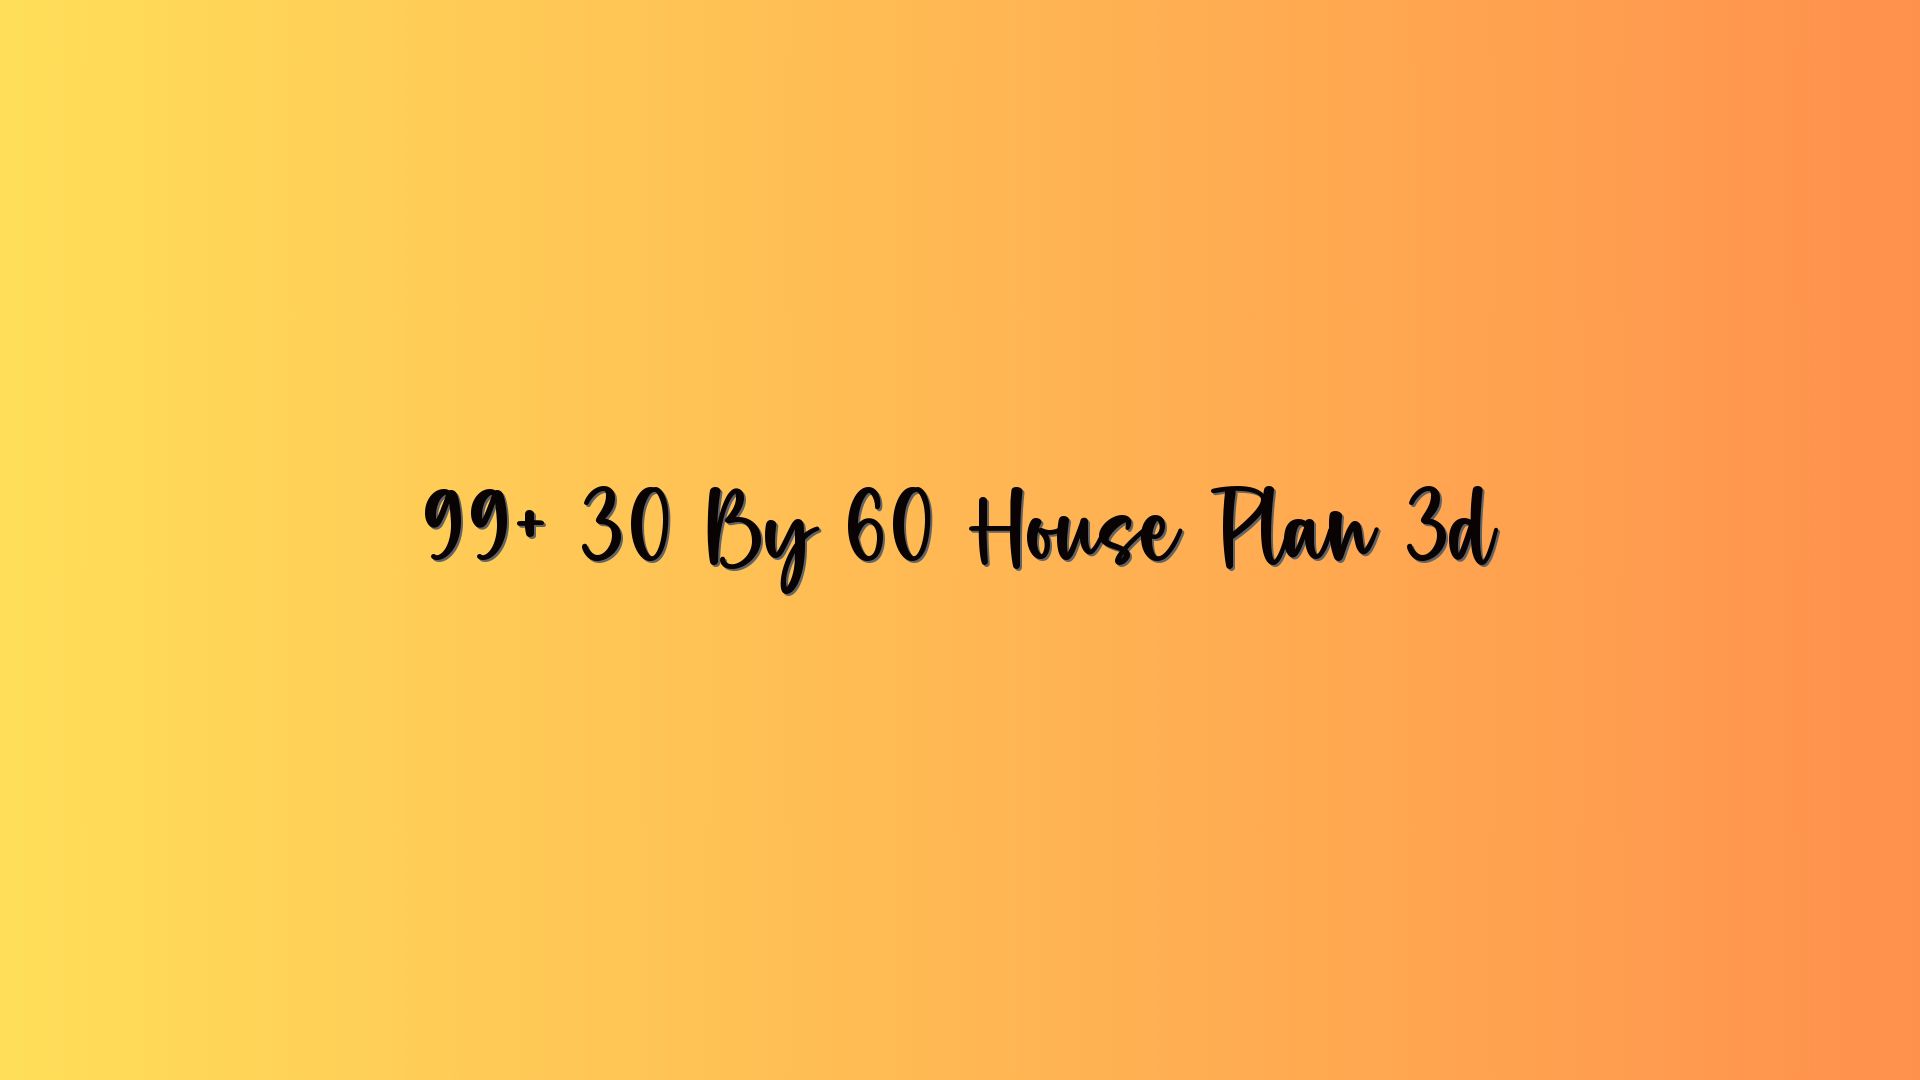 99+ 30 By 60 House Plan 3d